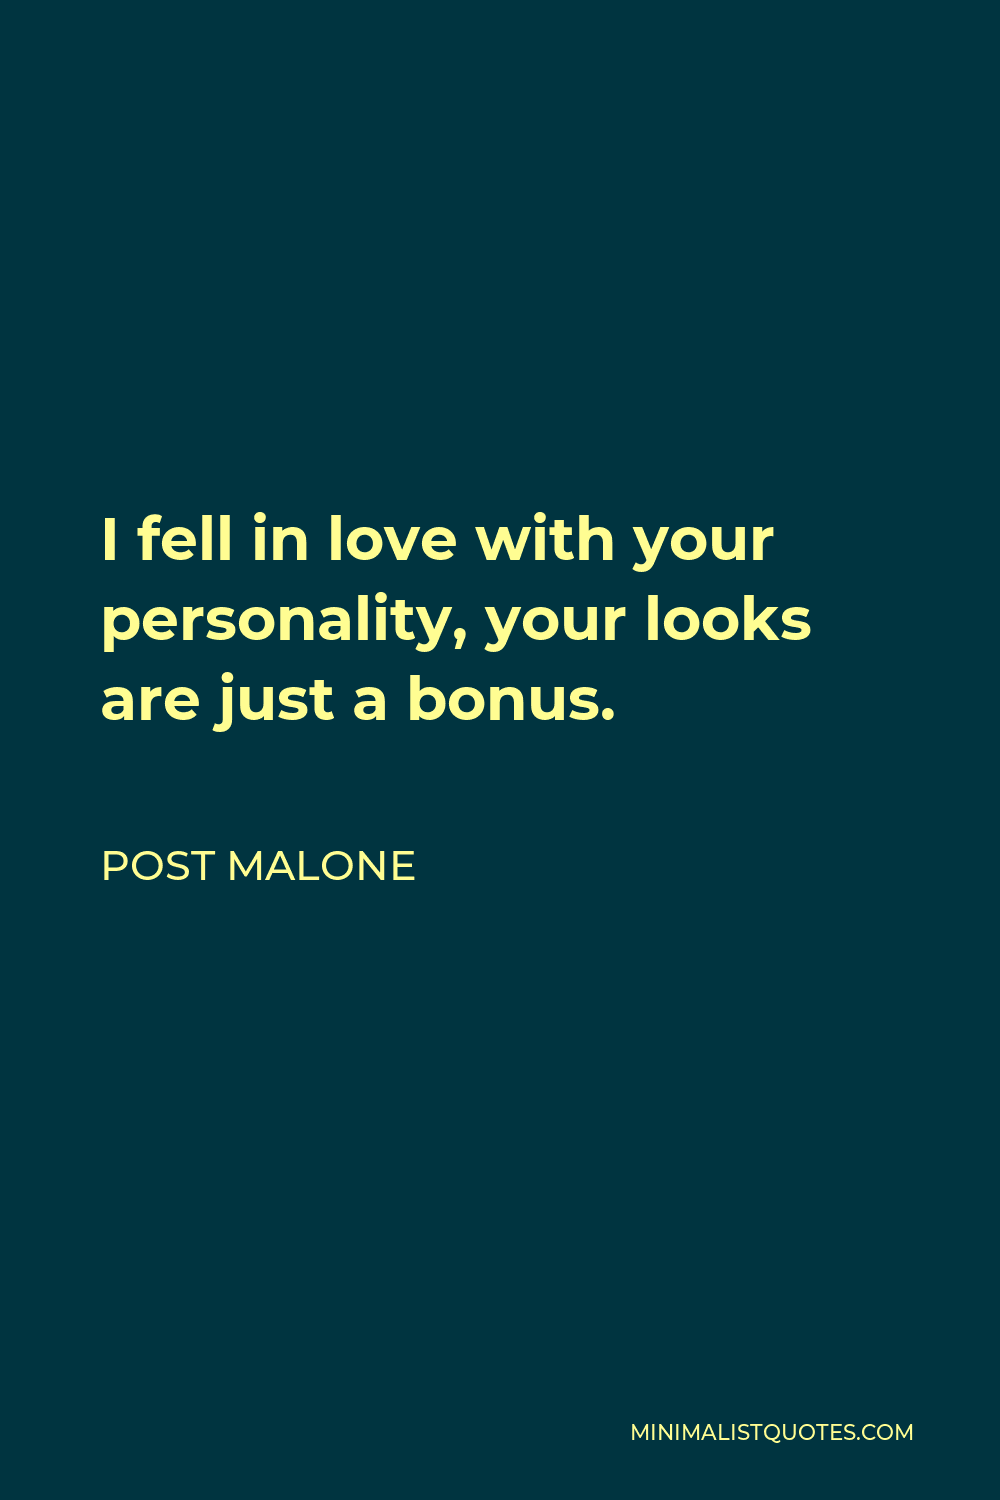 Post Malone Quote - I fell in love with your personality, your looks are just a bonus.